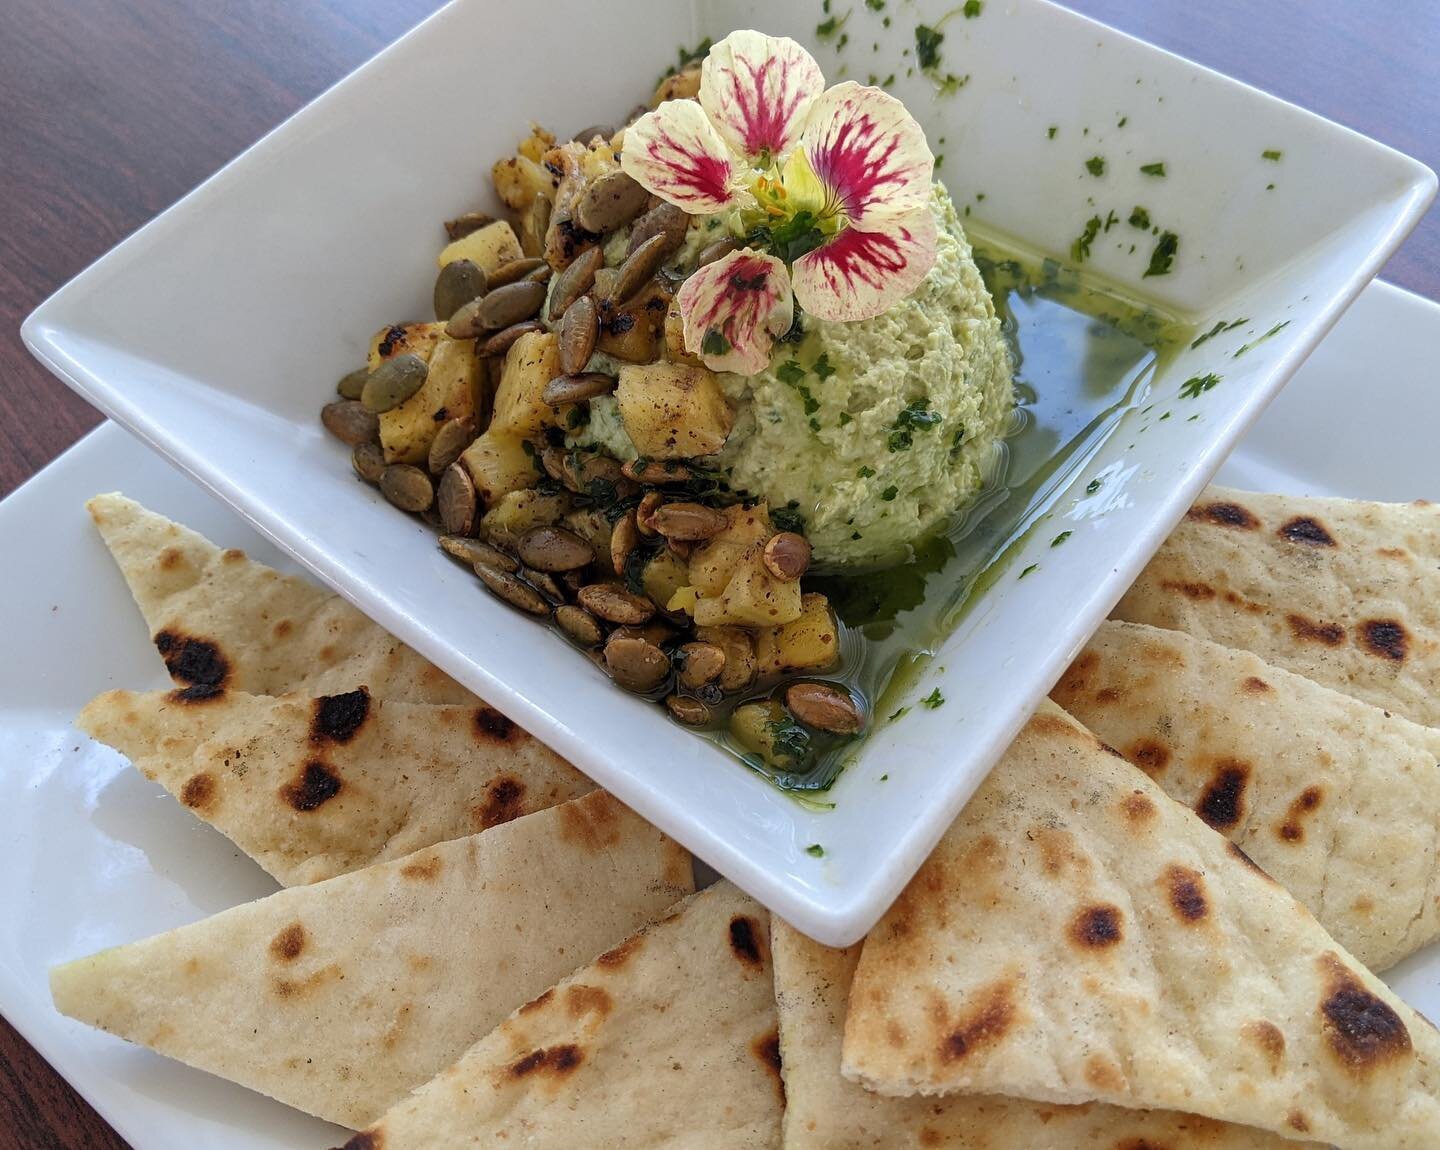 Special this weekend! Edamame Hummus with Pepitas and Sumac Grilled Pineapple, and Cantaloupe Daiquiri - using melons from Mountain View Farm!